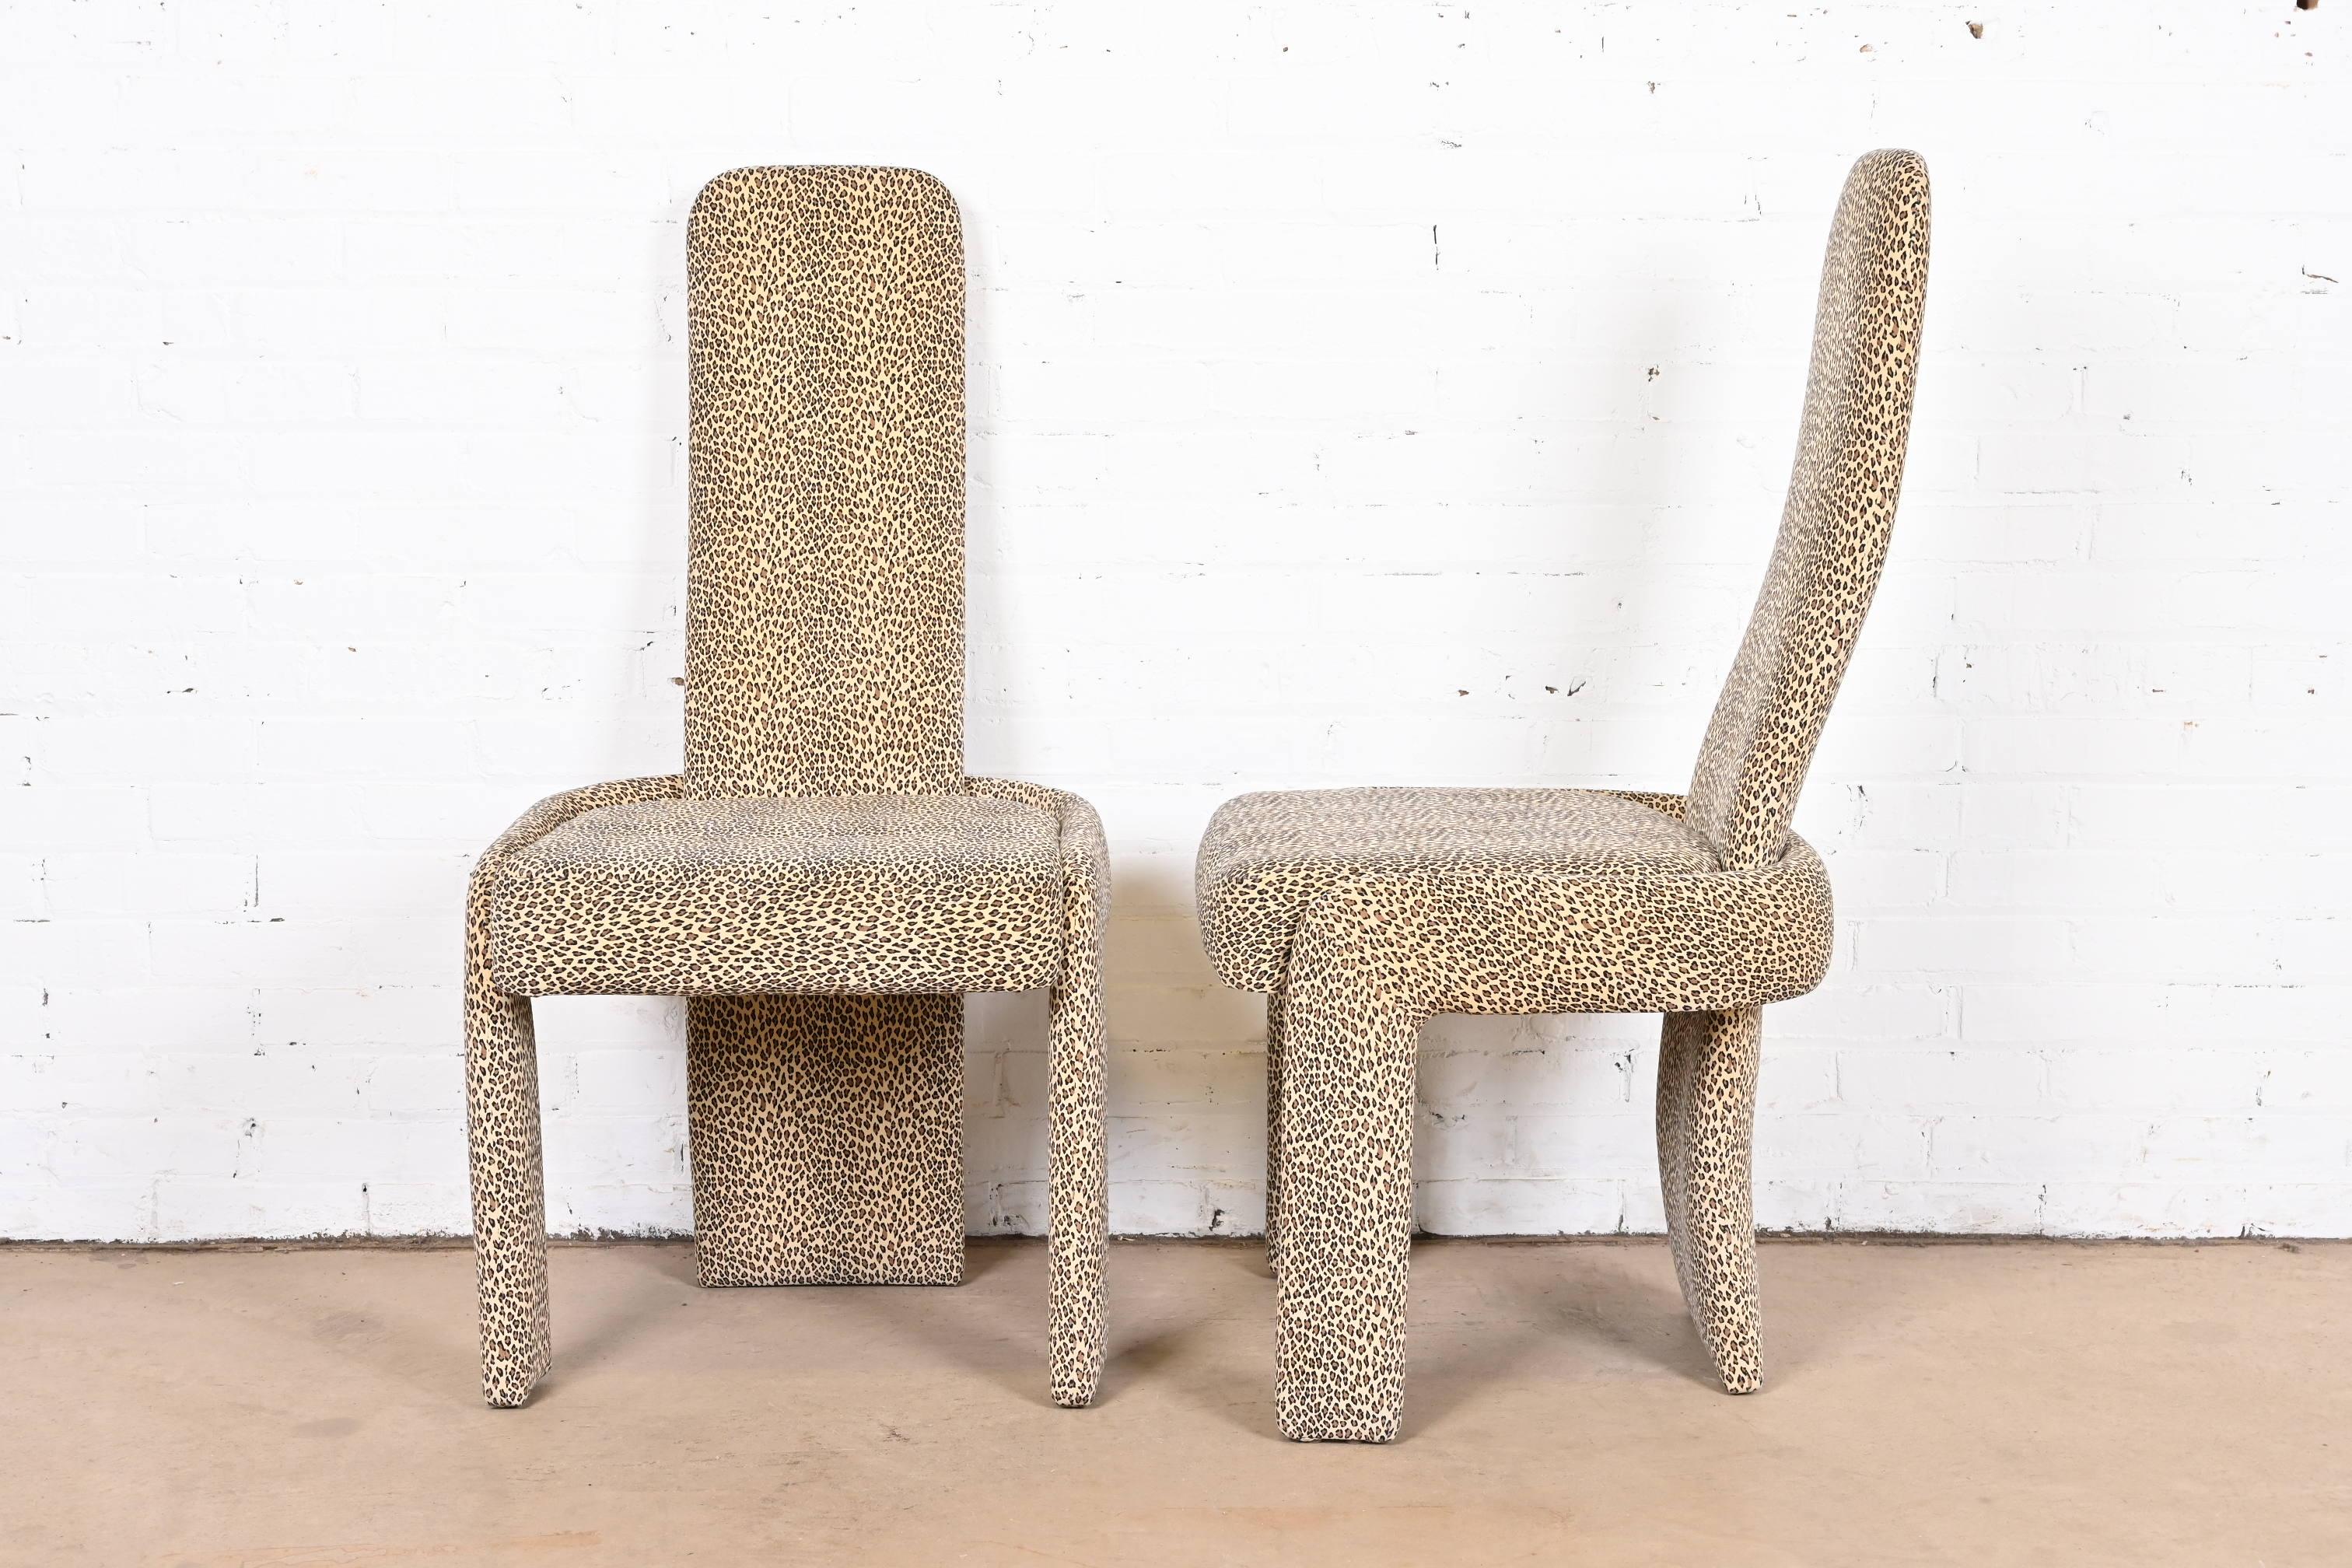 Late 20th Century Pierre Cardin Leopard Print Upholstered High Back Dining Chairs, Set of Six For Sale